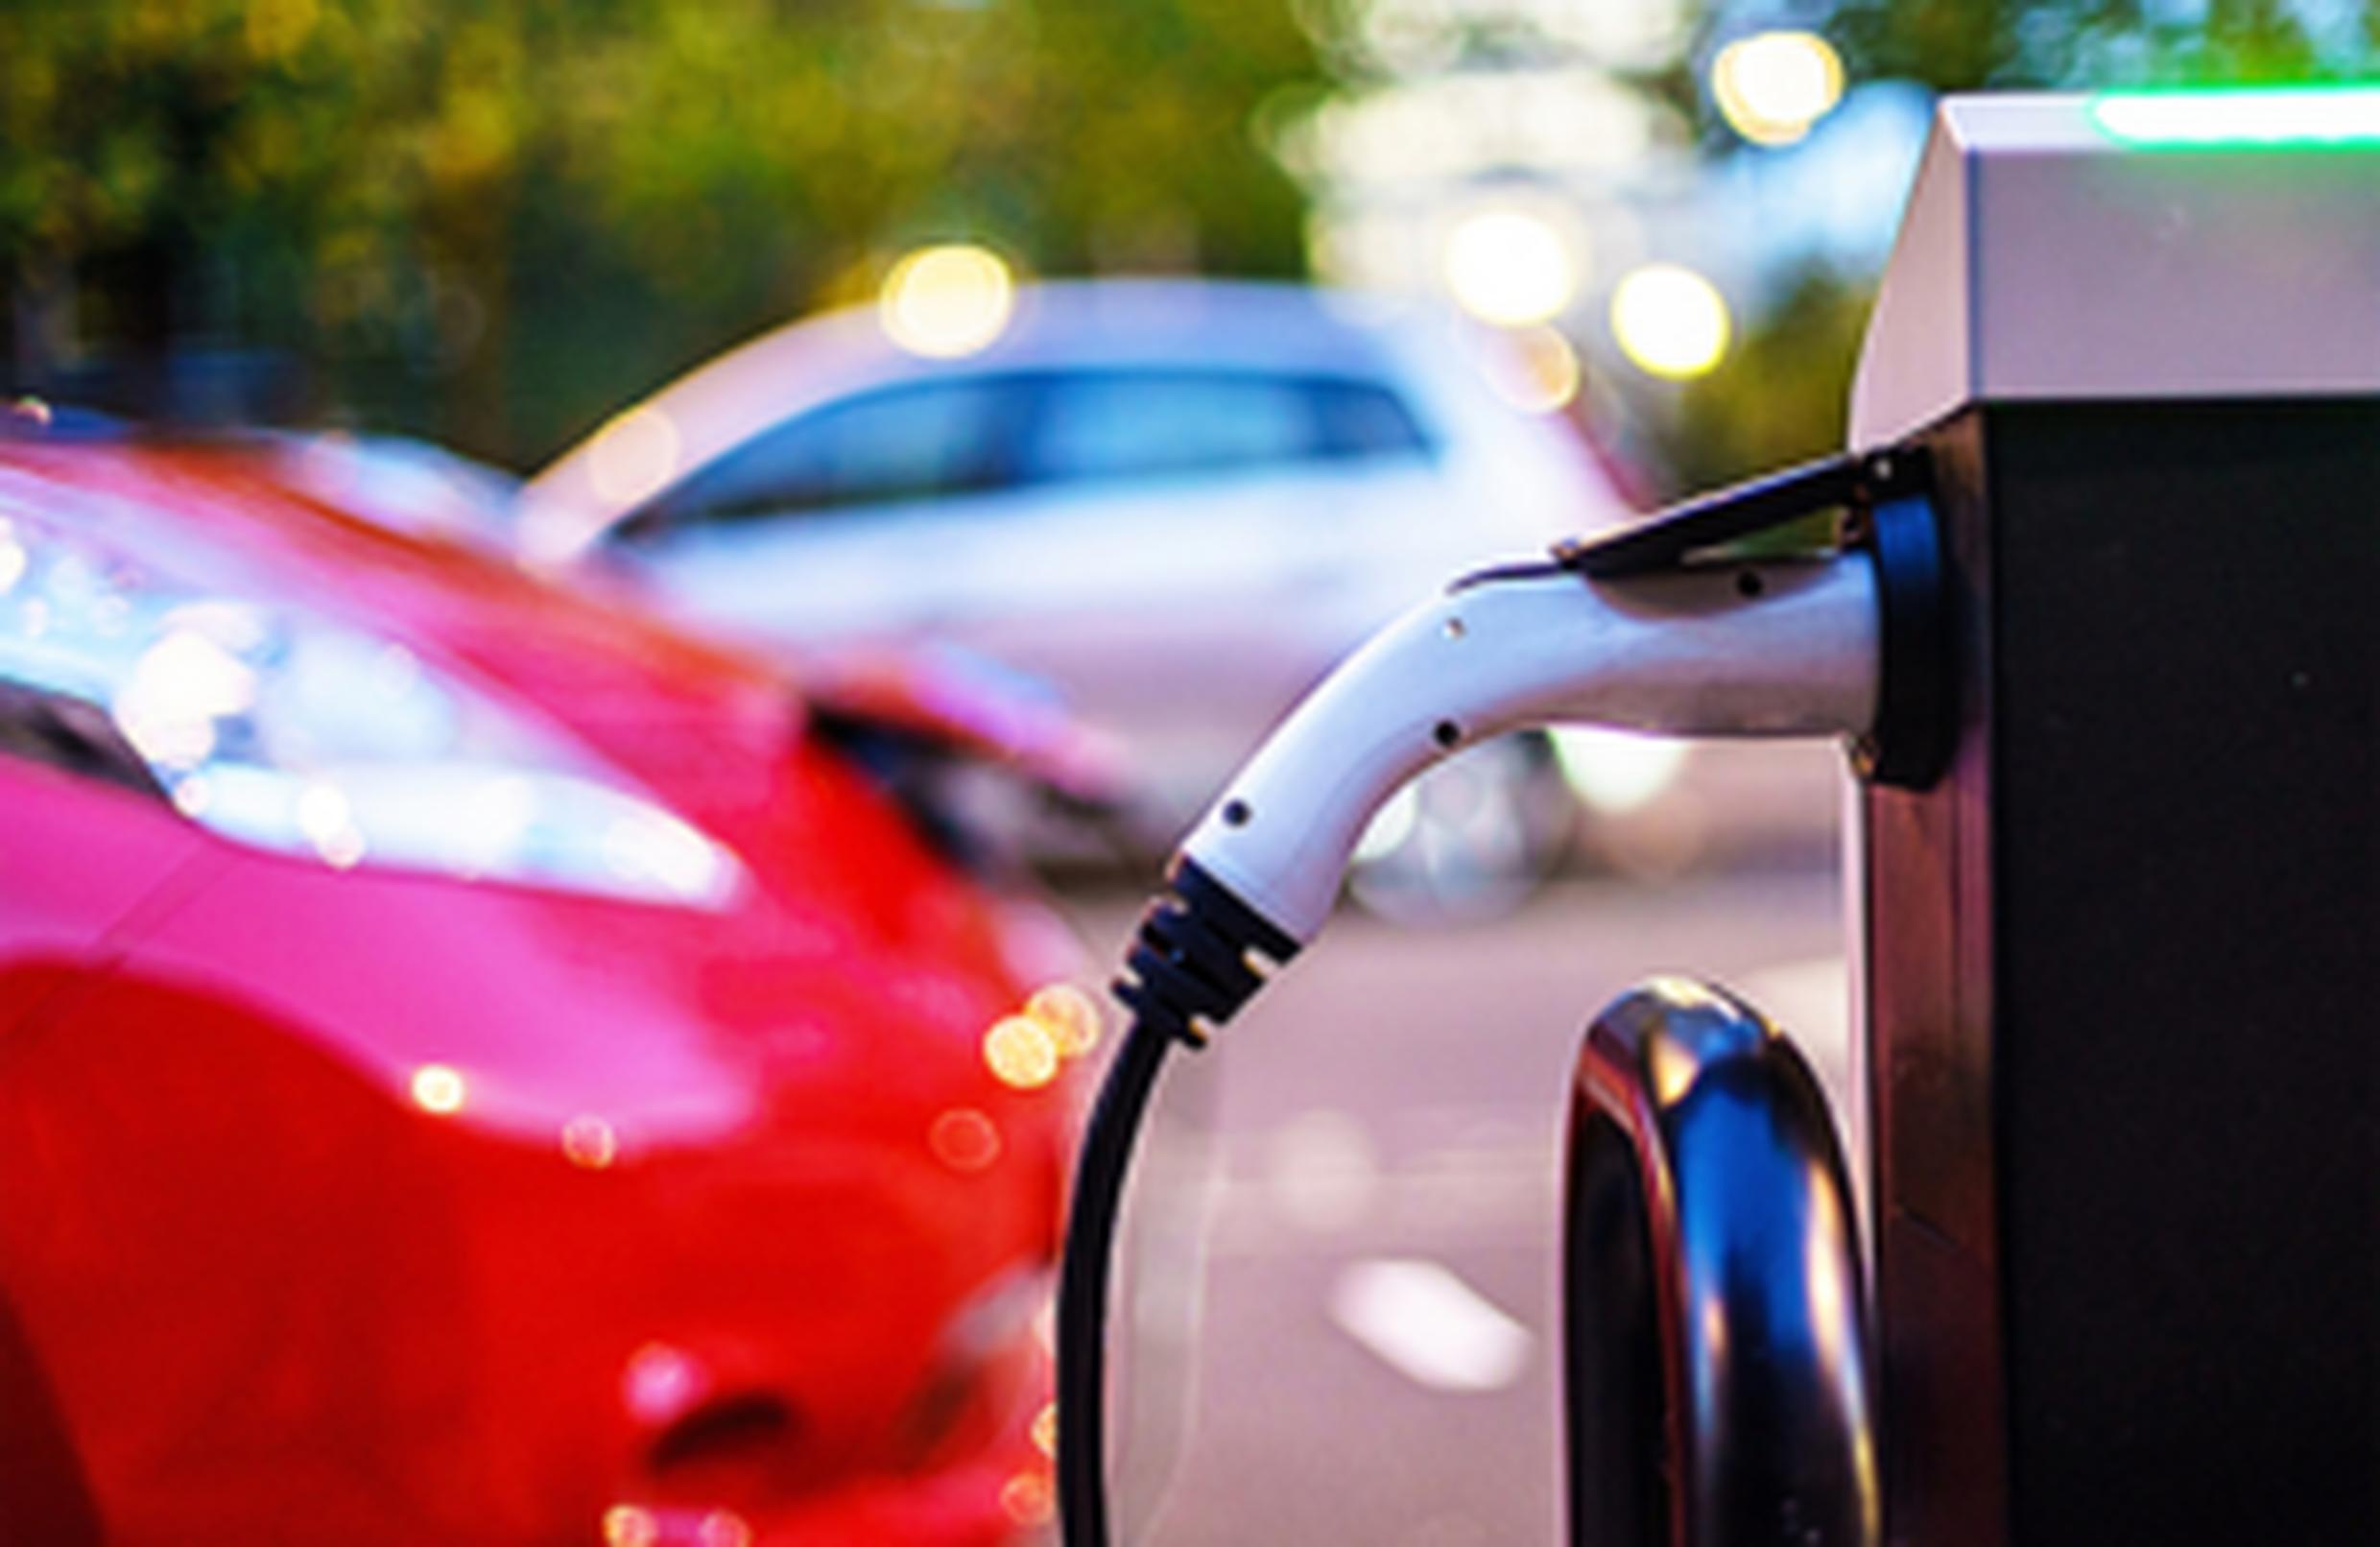 The DfT states that the UK remains on track to reaching 300,000 public chargepoints by 2030